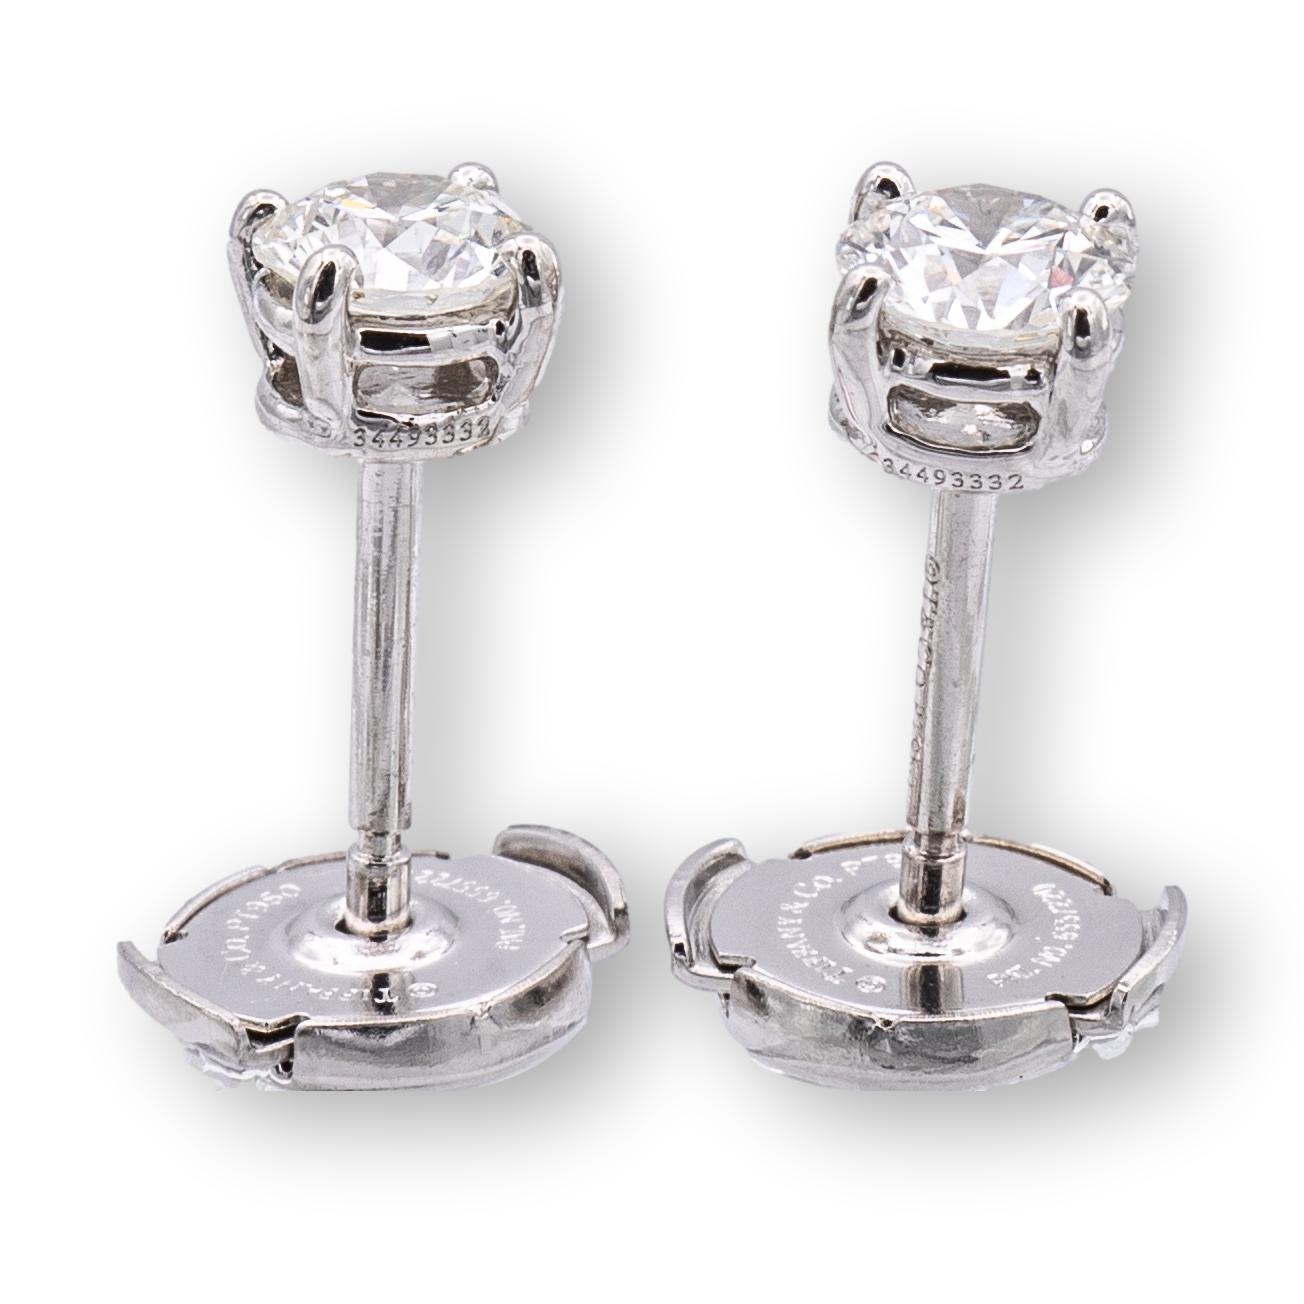 Pair of Tiffany & Co. Diamond Stud earrings finely crafted in a Platinum 4 prong basket setting featuring two perfectly matched round brilliant cut diamonds weighing 0.76 carats total weight. One round brilliant diamond weighs 0.38 carats graded J